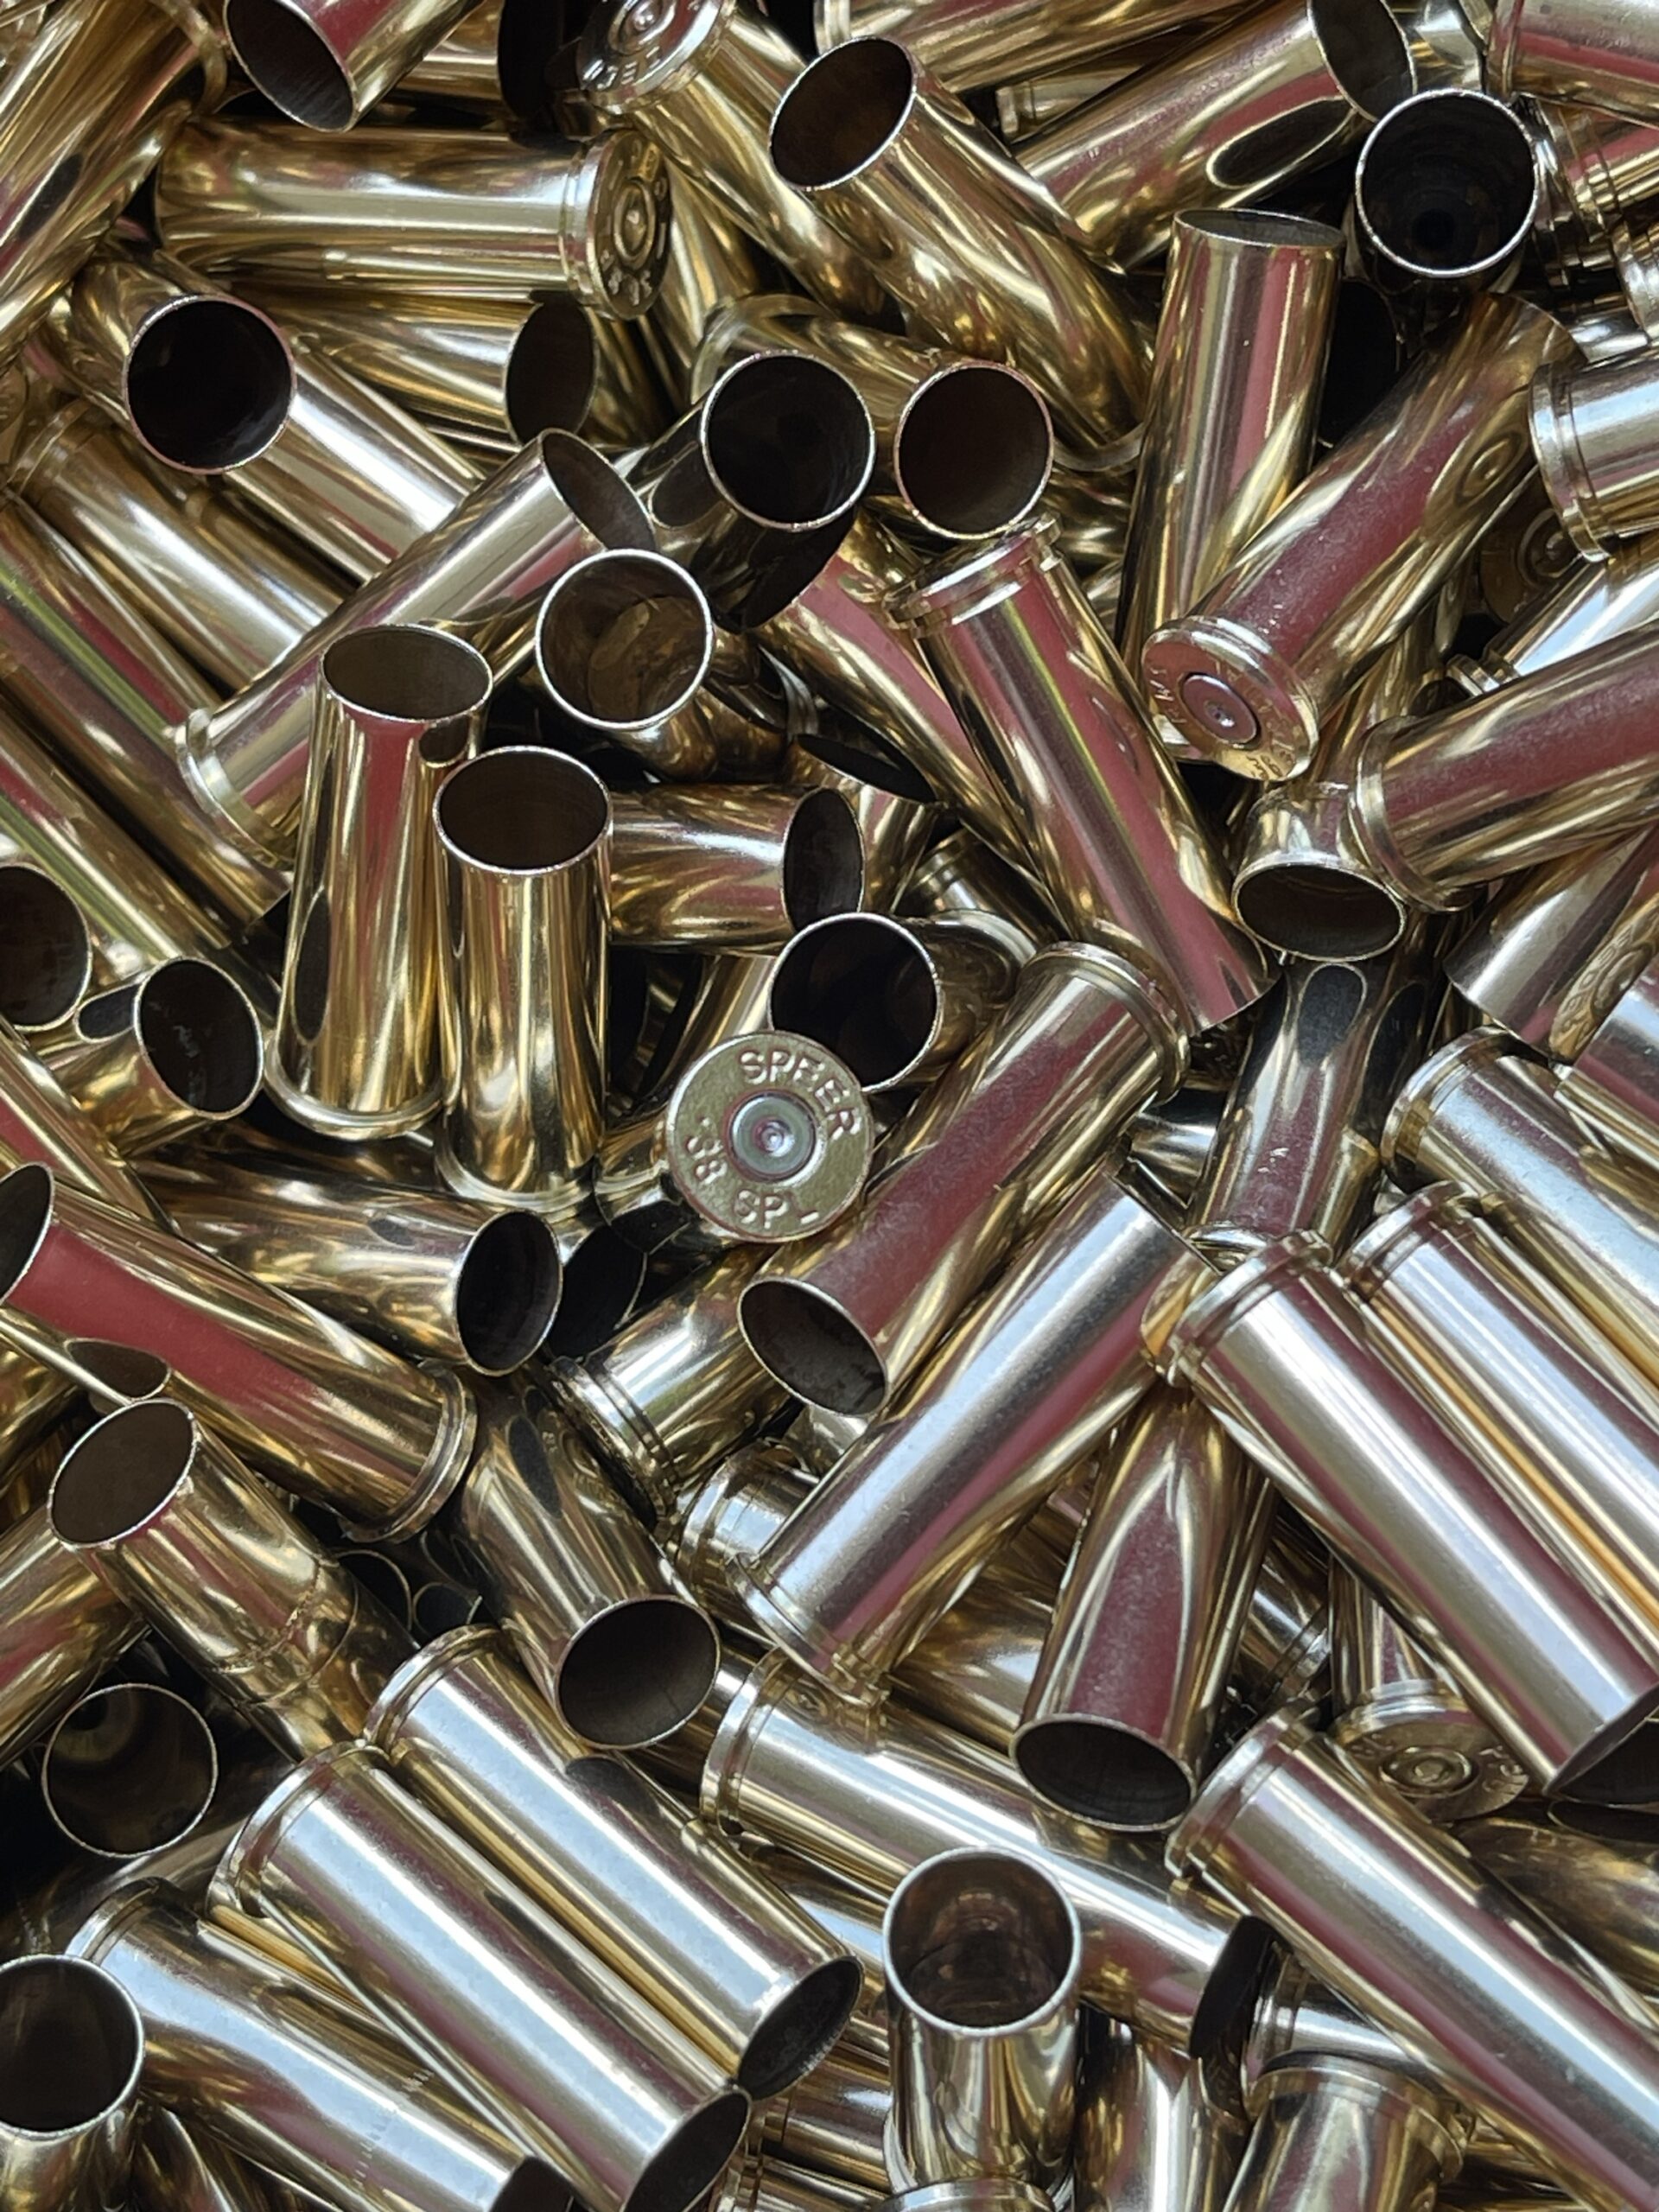 Empty Brass Shells 38 Special Used Bullet Casings 38 Spl Polished